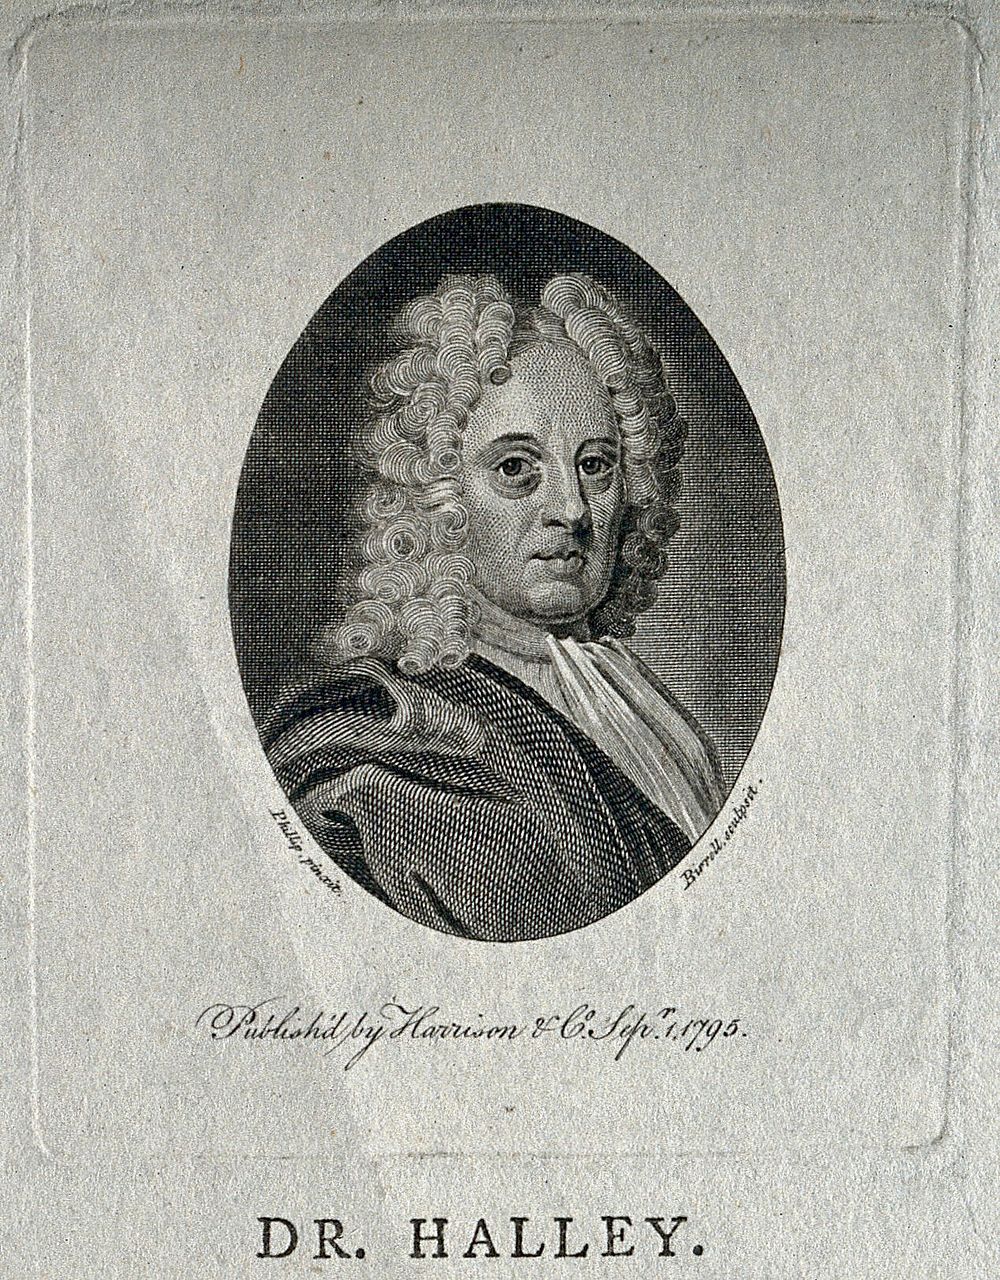 Edmund Halley. Line engraving by A. Birrell, 1795, after R. Phillips.